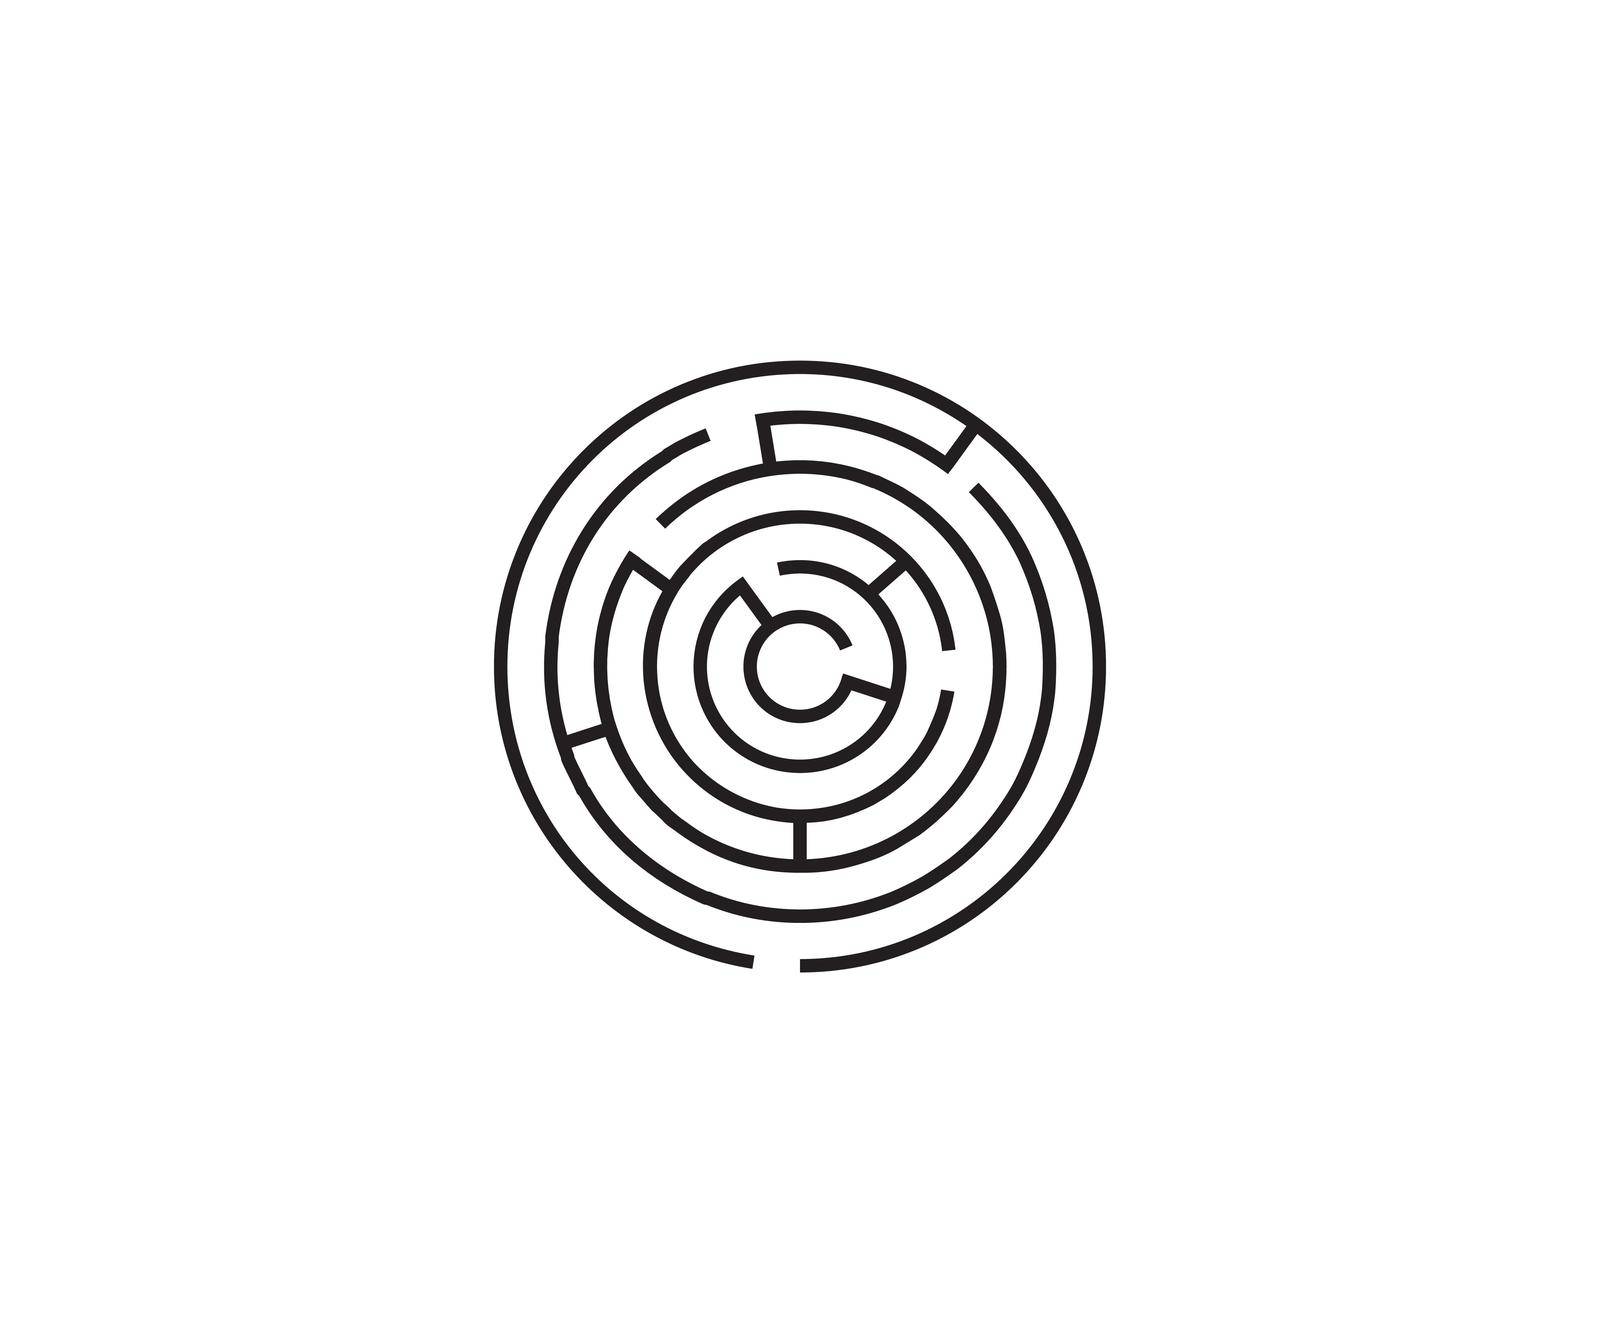 Labyrinth, maze, strategy icon on white background. Vector illustration. by Vertyb